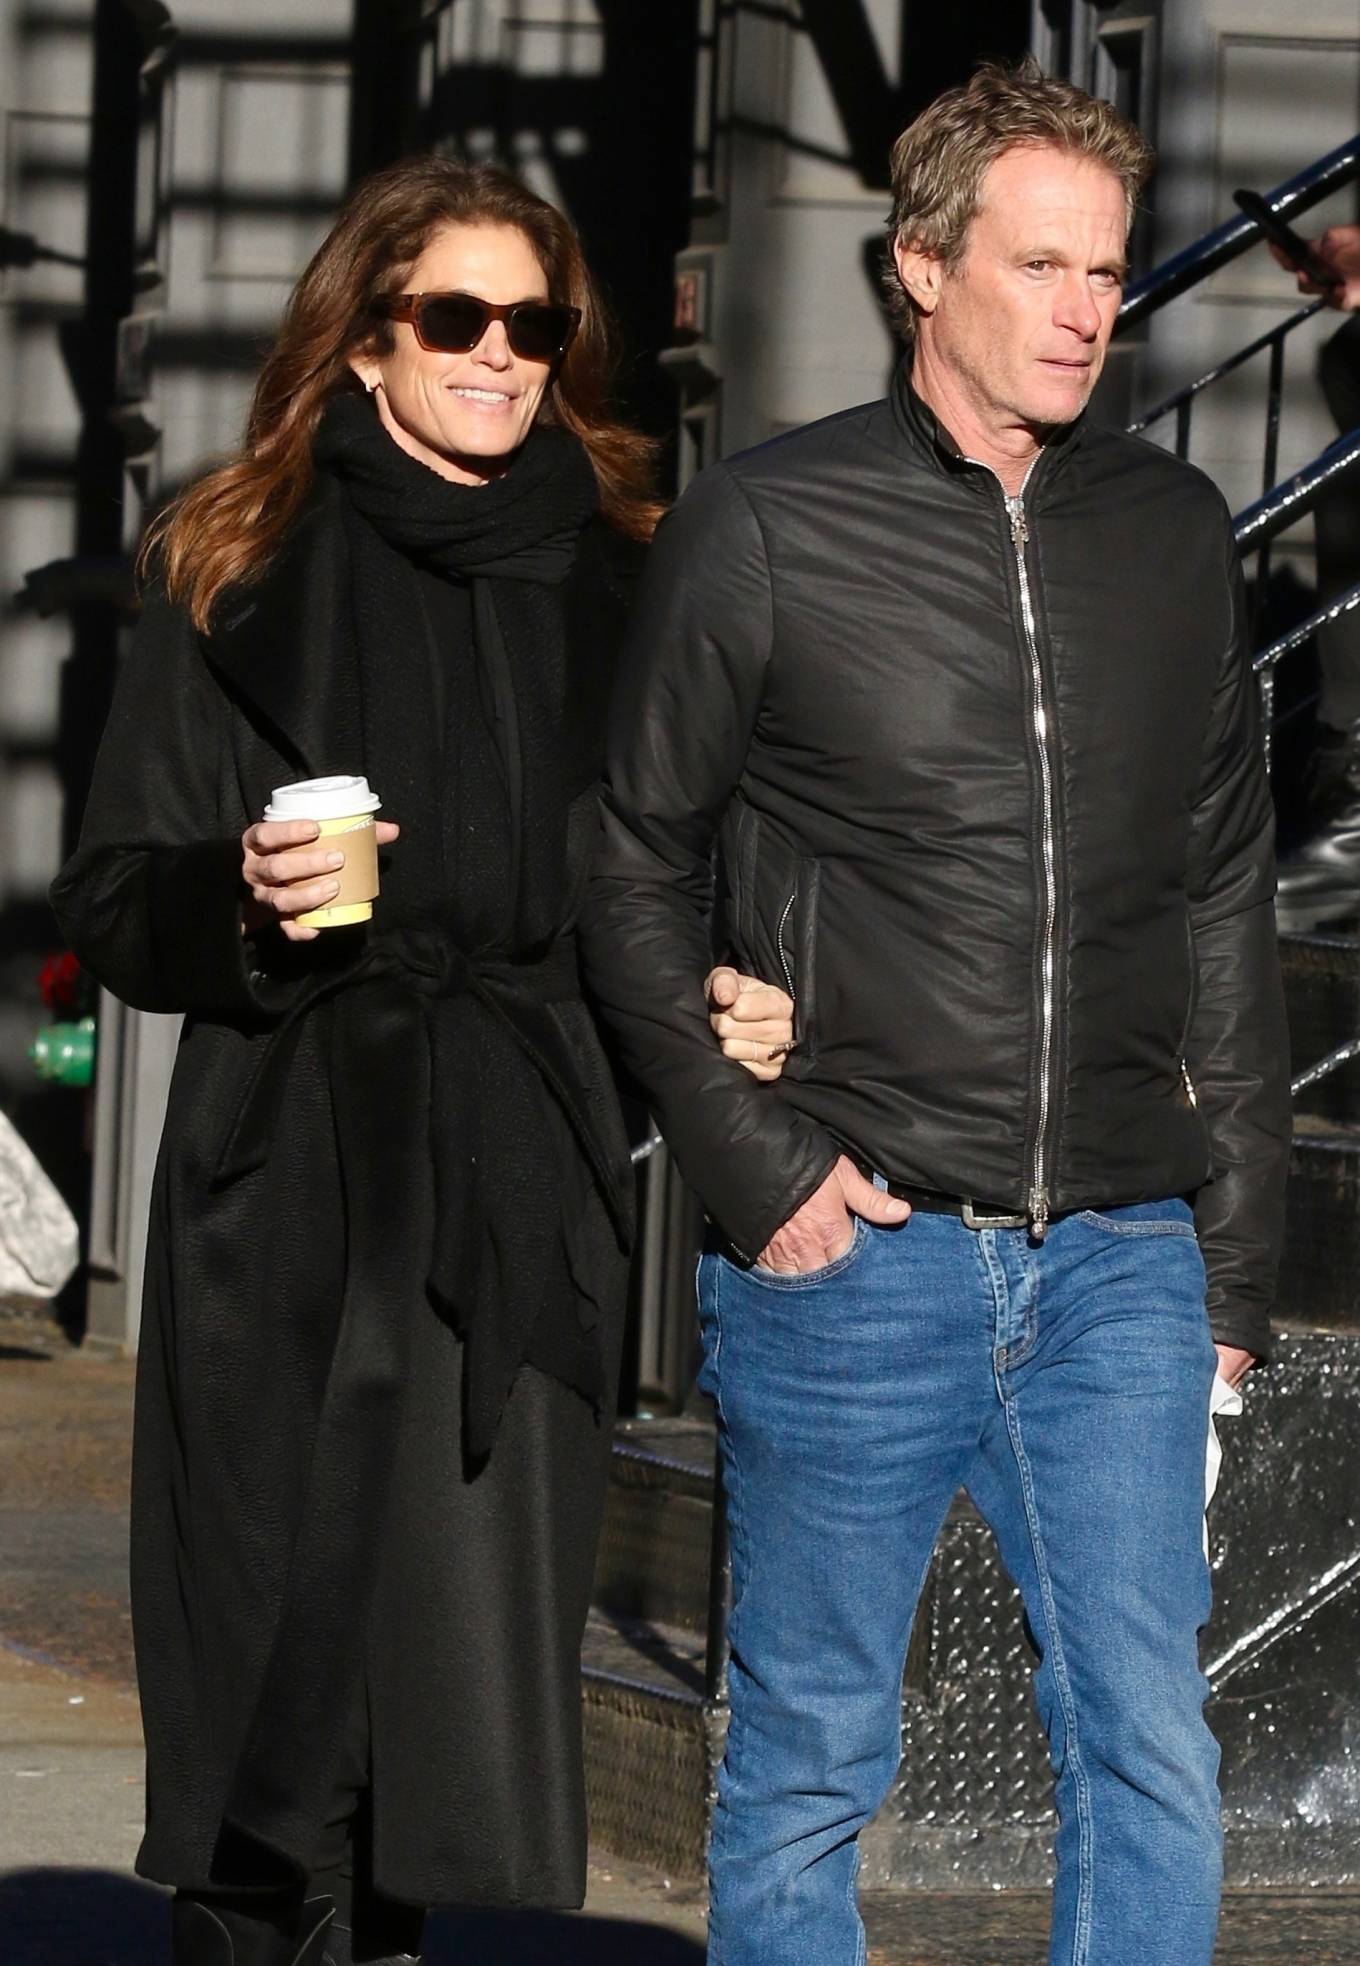 Cindy Crawford 2022 : Cindy Crawford – With Rande Gerber having lunch in Manhattan’s SoHo area-04